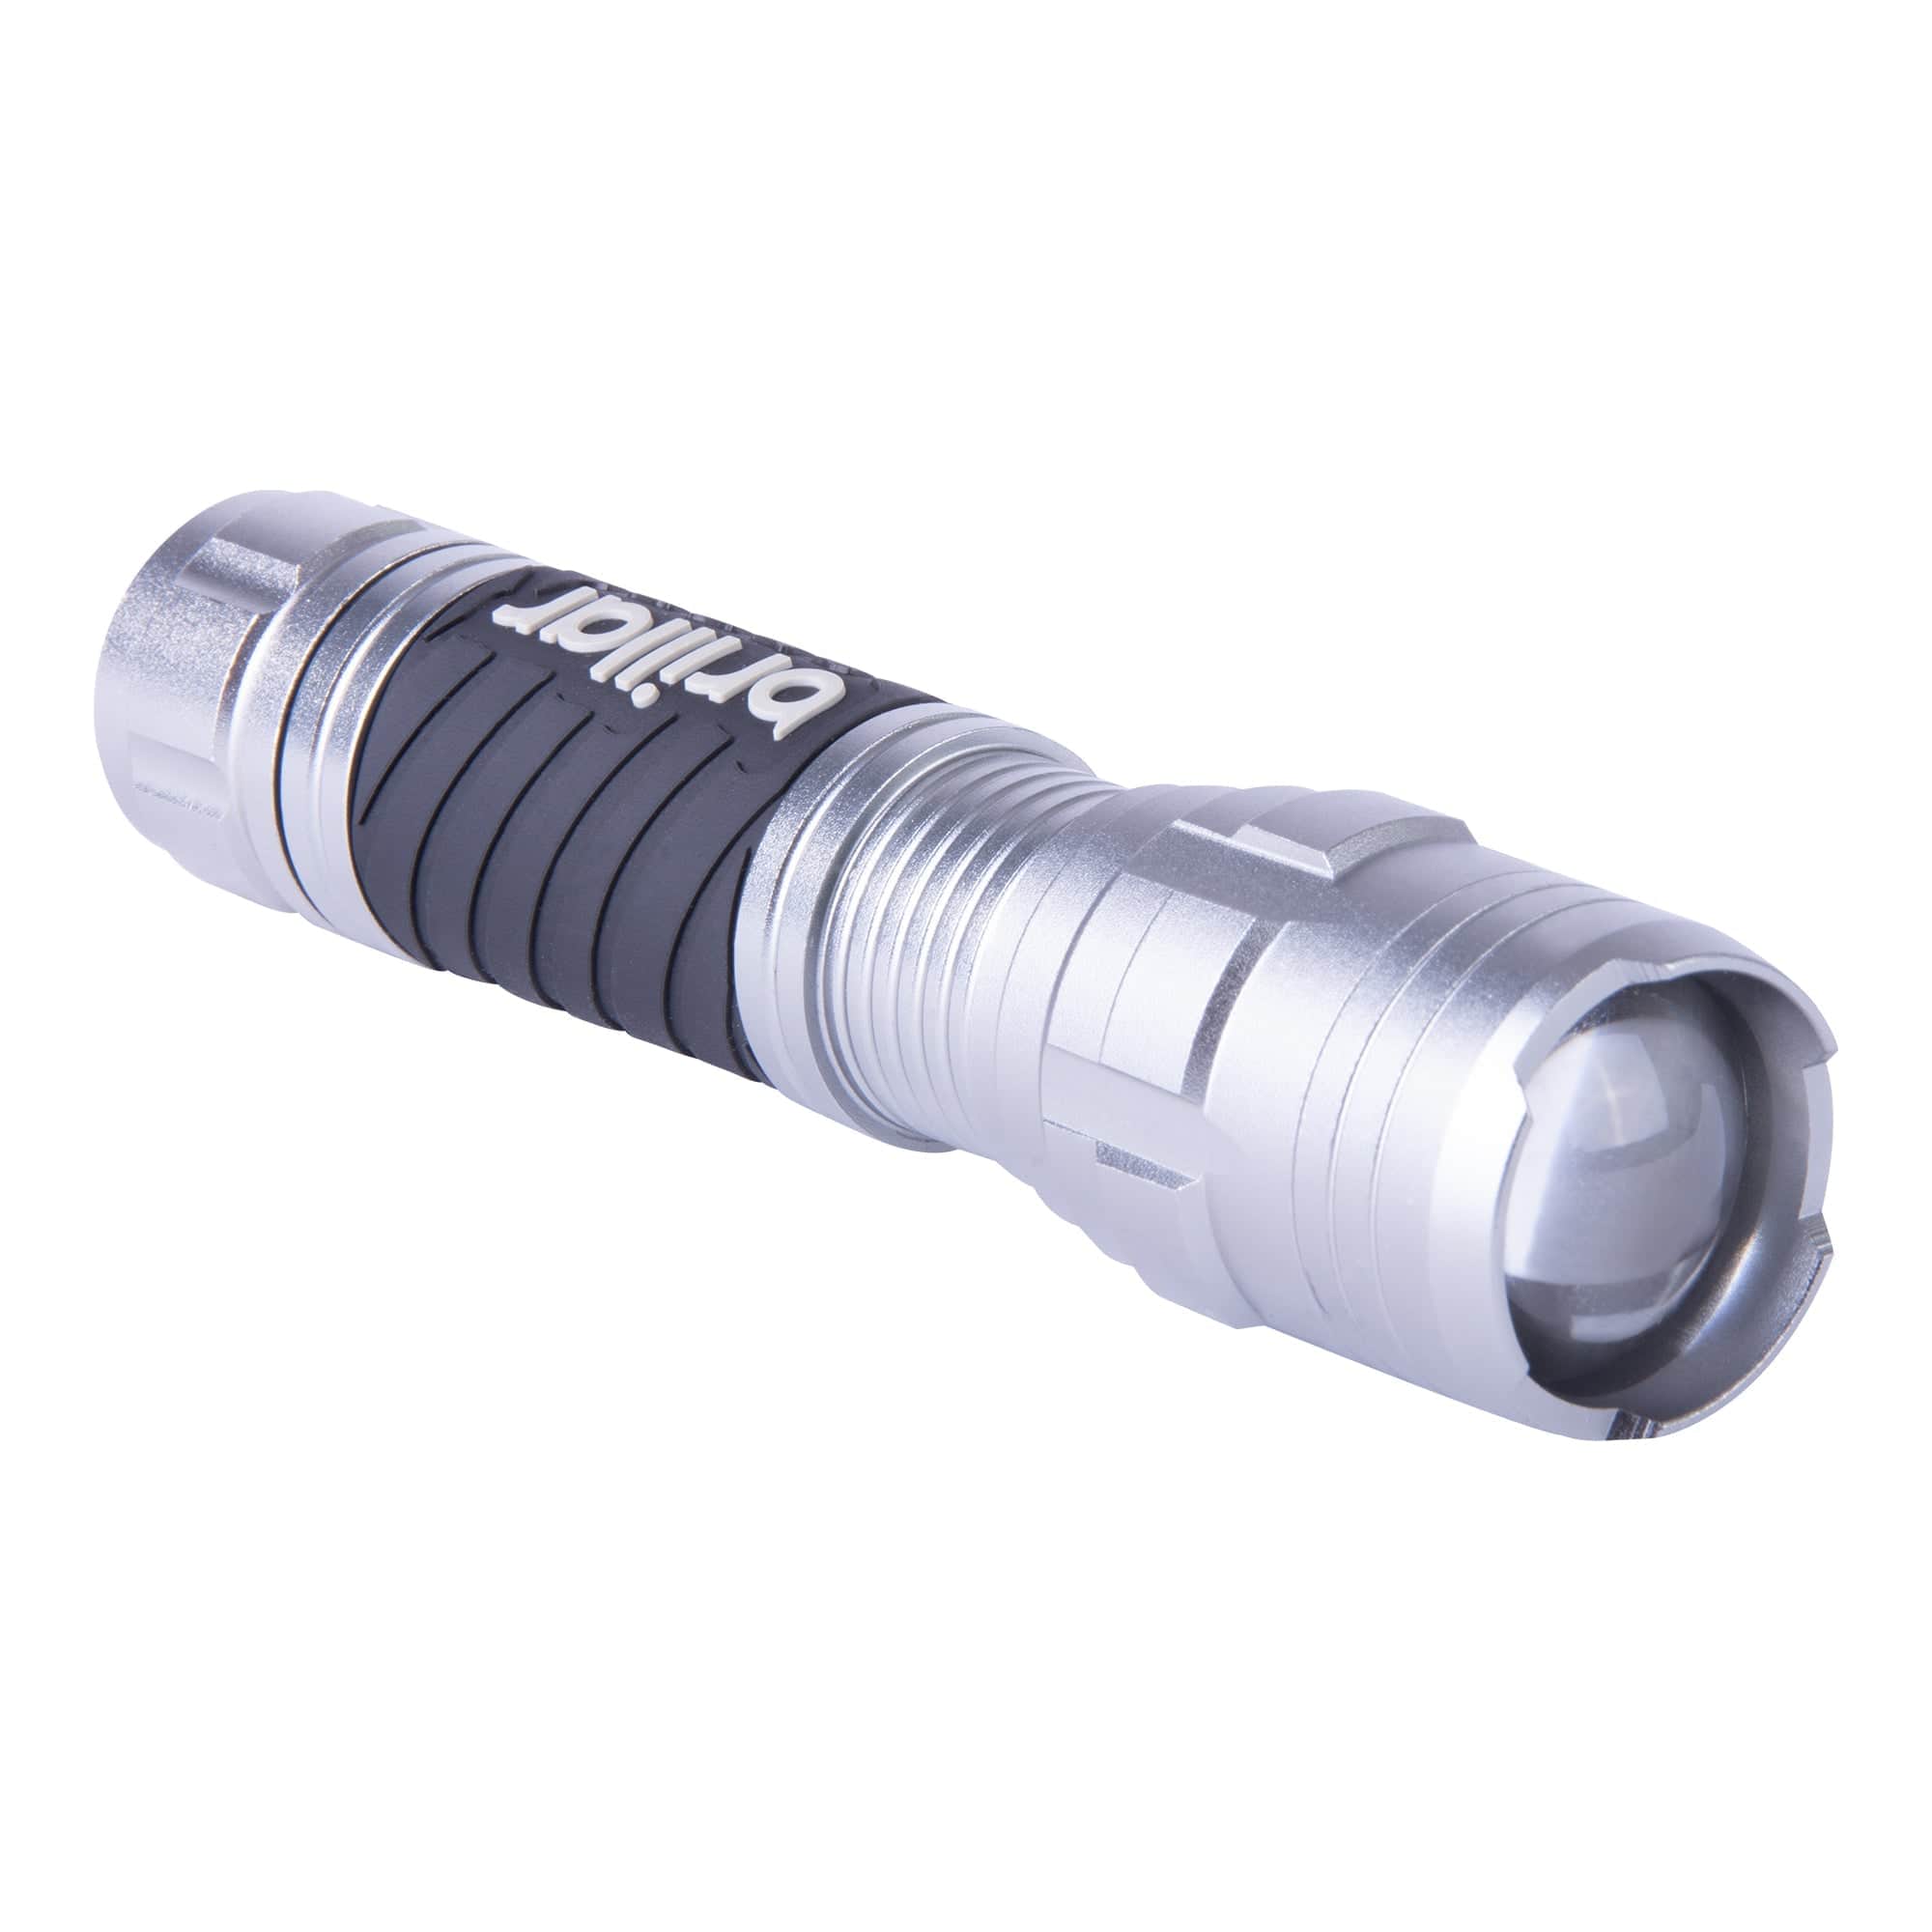 Brillar Electrical Mighty Mate - 300 Lumen Battery Torch BR0077